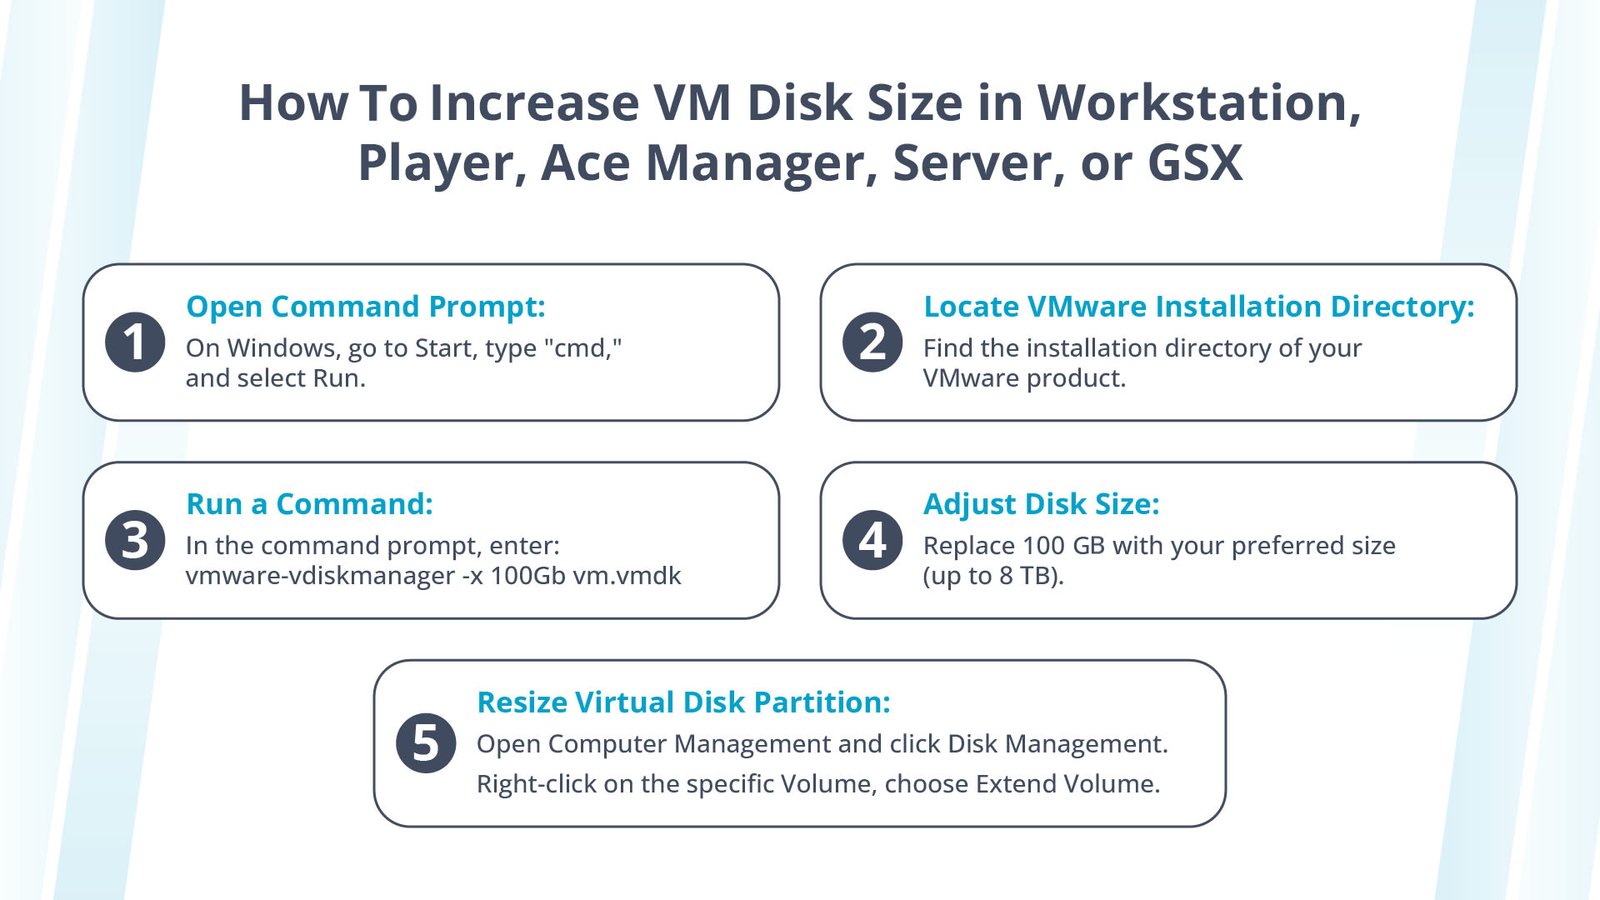 Steps for increasing VMware disk size in Workstation, Player, Ace Manager, Server, or GSX.